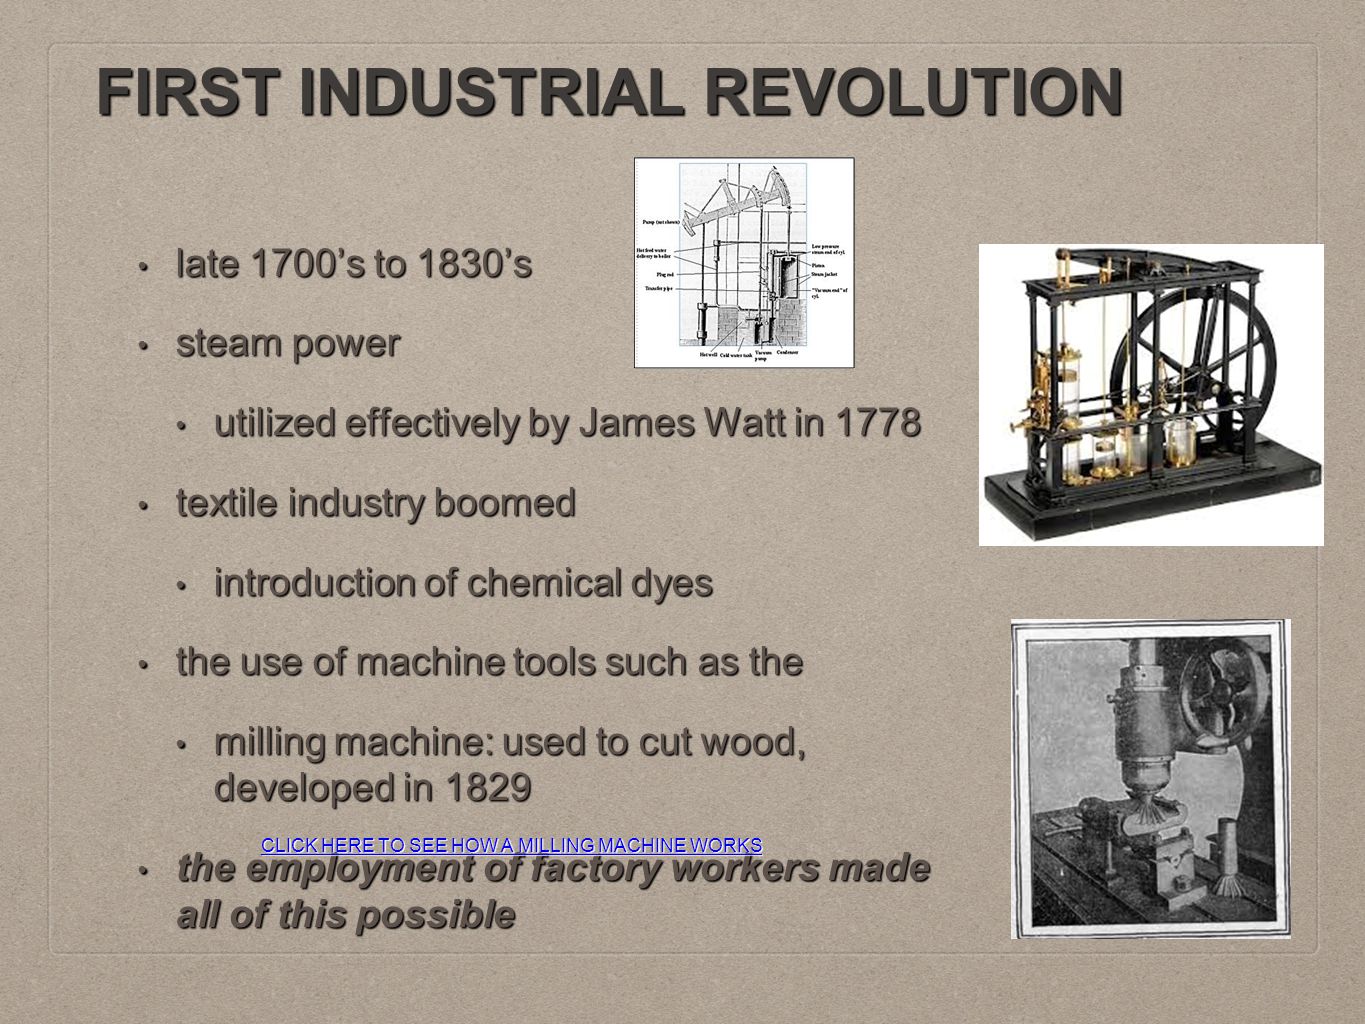 FIRST INDUSTRIAL REVOLUTION late 1700’s to 1830’s late 1700’s to 1830’s steam power steam power utilized effectively by James Watt in 1778 utilized effectively by James Watt in 1778 textile industry boomed textile industry boomed introduction of chemical dyes introduction of chemical dyes the use of machine tools such as the the use of machine tools such as the milling machine: used to cut wood, developed in 1829 milling machine: used to cut wood, developed in 1829 the employment of factory workers made all of this possible the employment of factory workers made all of this possible CLICK HERE TO SEE HOW A MILLING MACHINE WORKS CLICK HERE TO SEE HOW A MILLING MACHINE WORKS